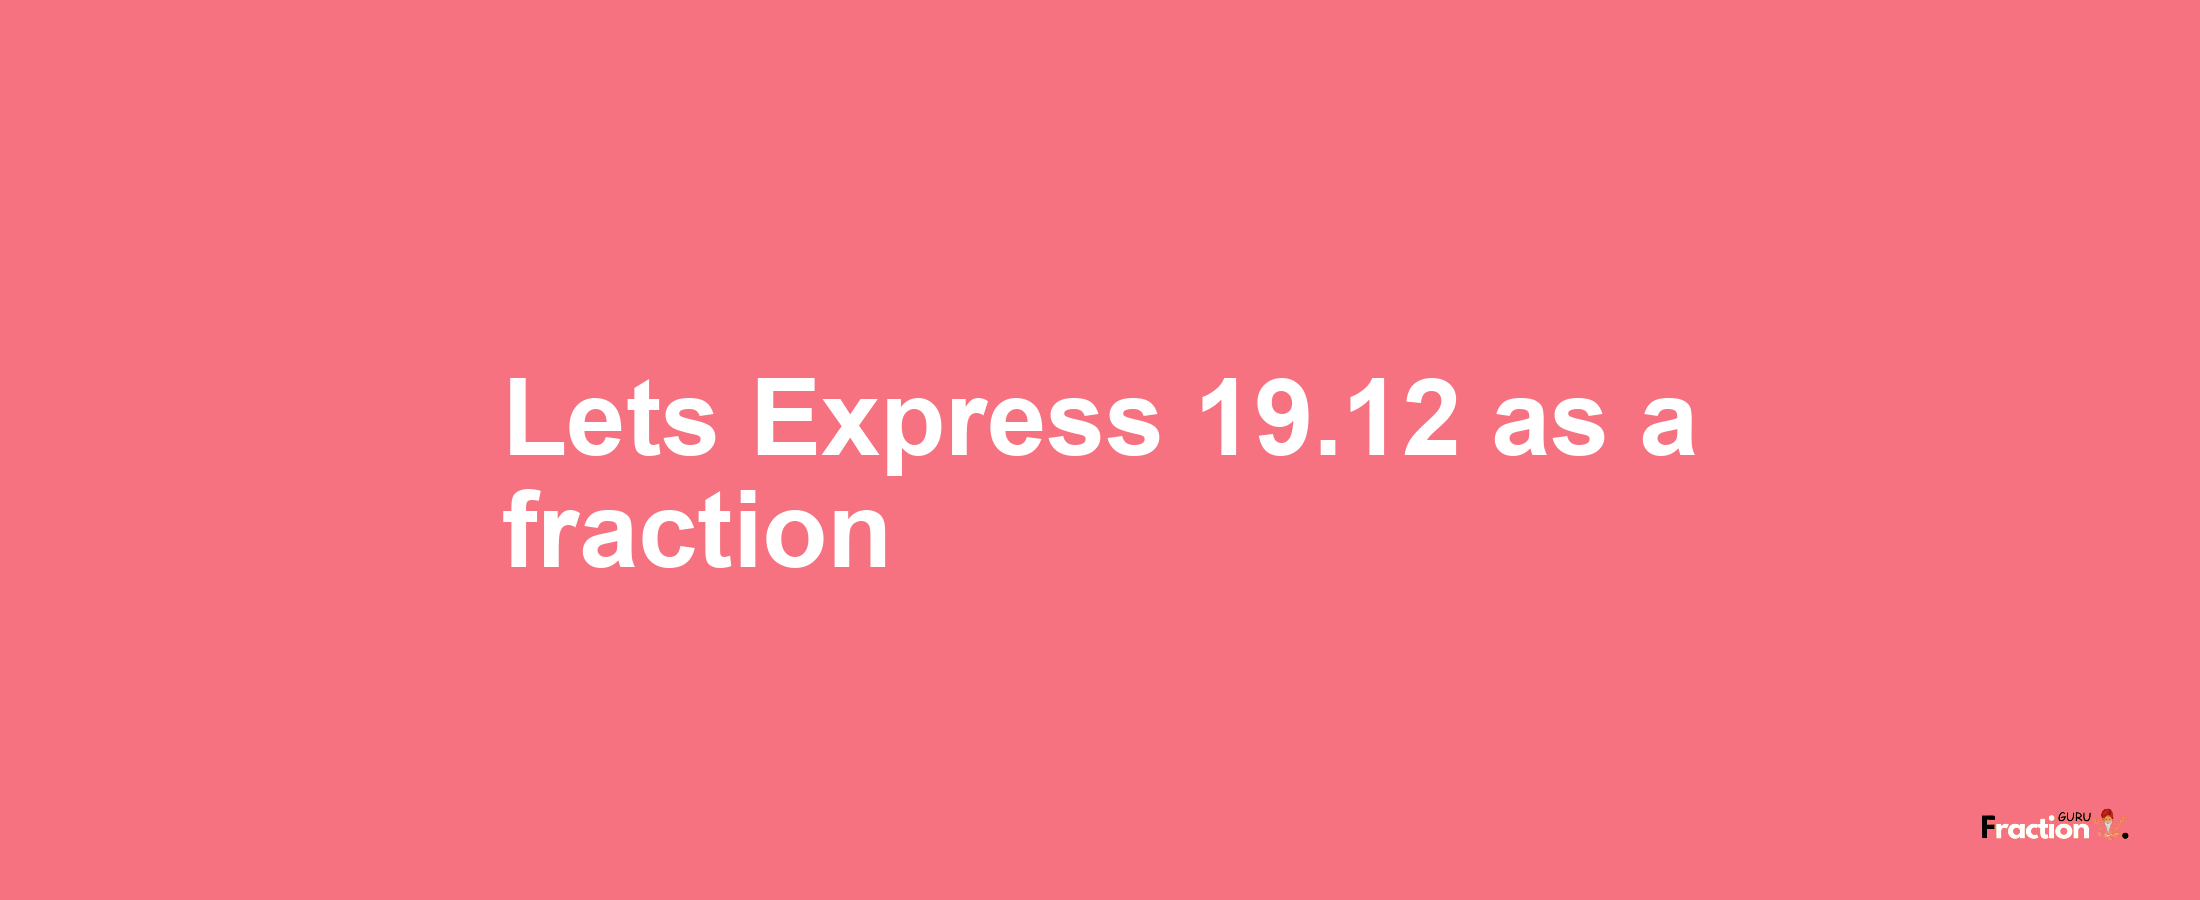 Lets Express 19.12 as afraction